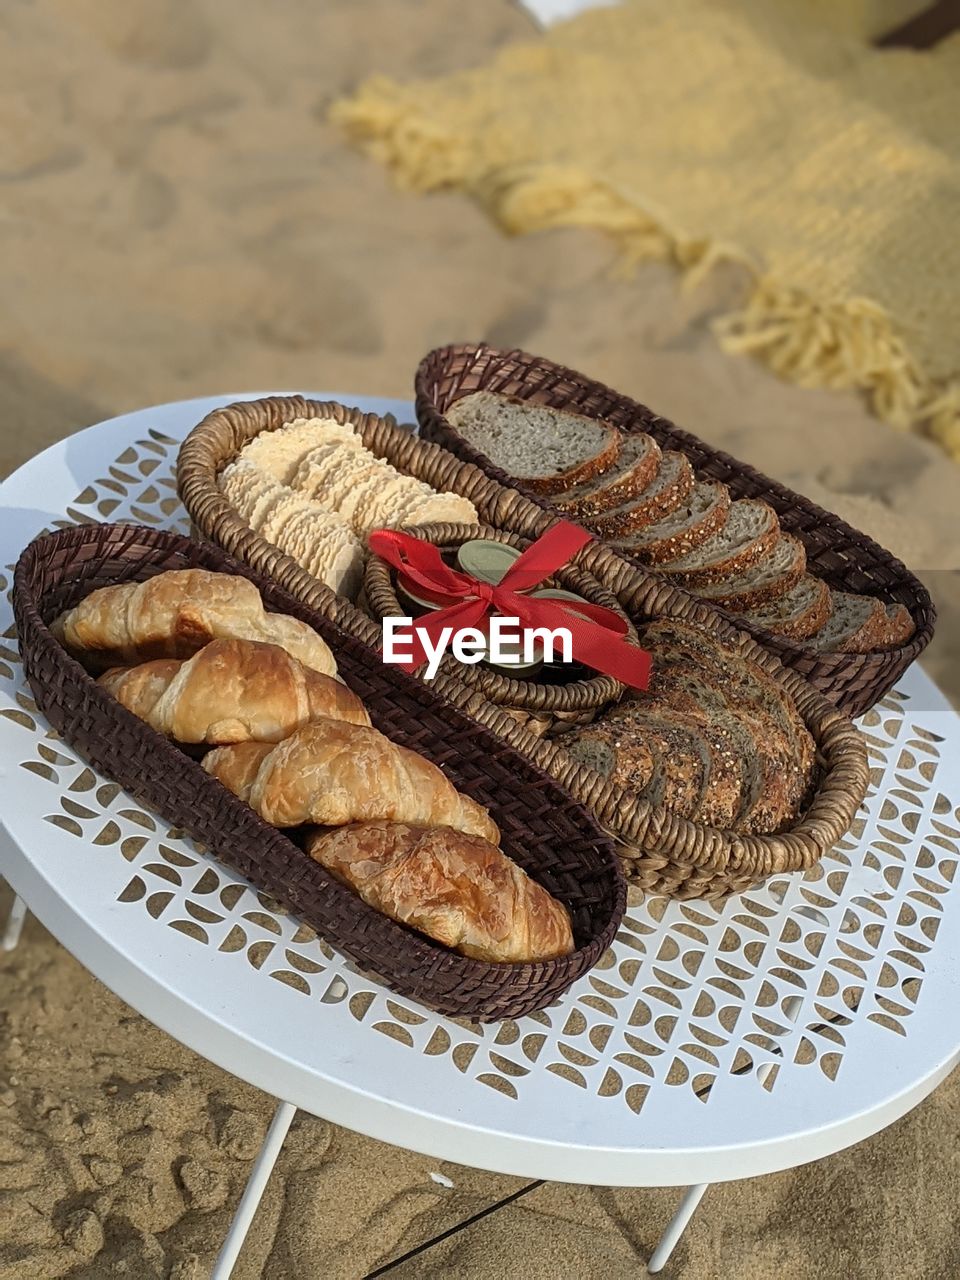 A bread picnic baskets with preserves neatly tied by a red bow in the middle.